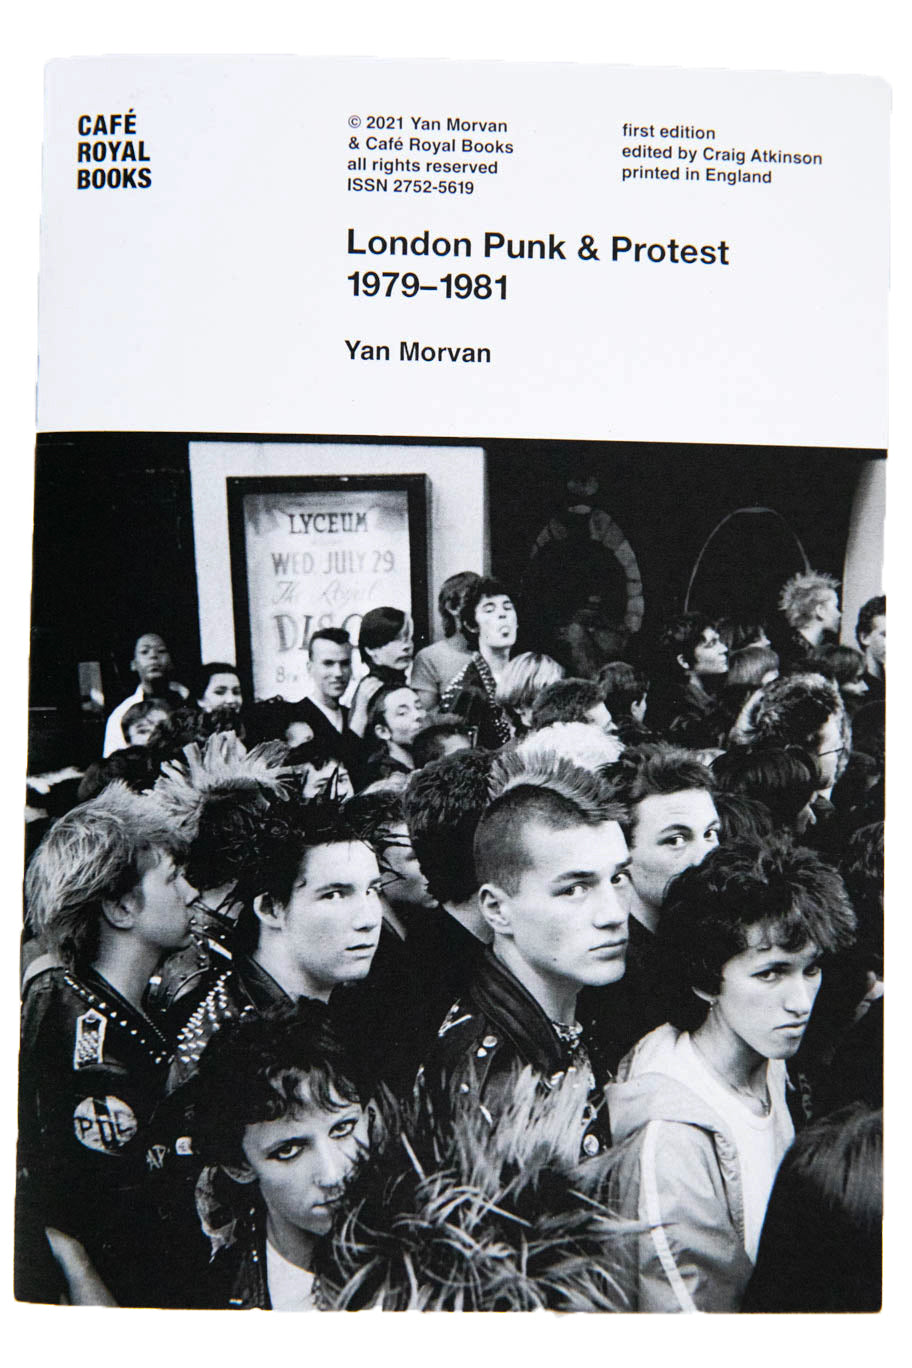 LONDON PUNK AND PROTEST 1979-1981